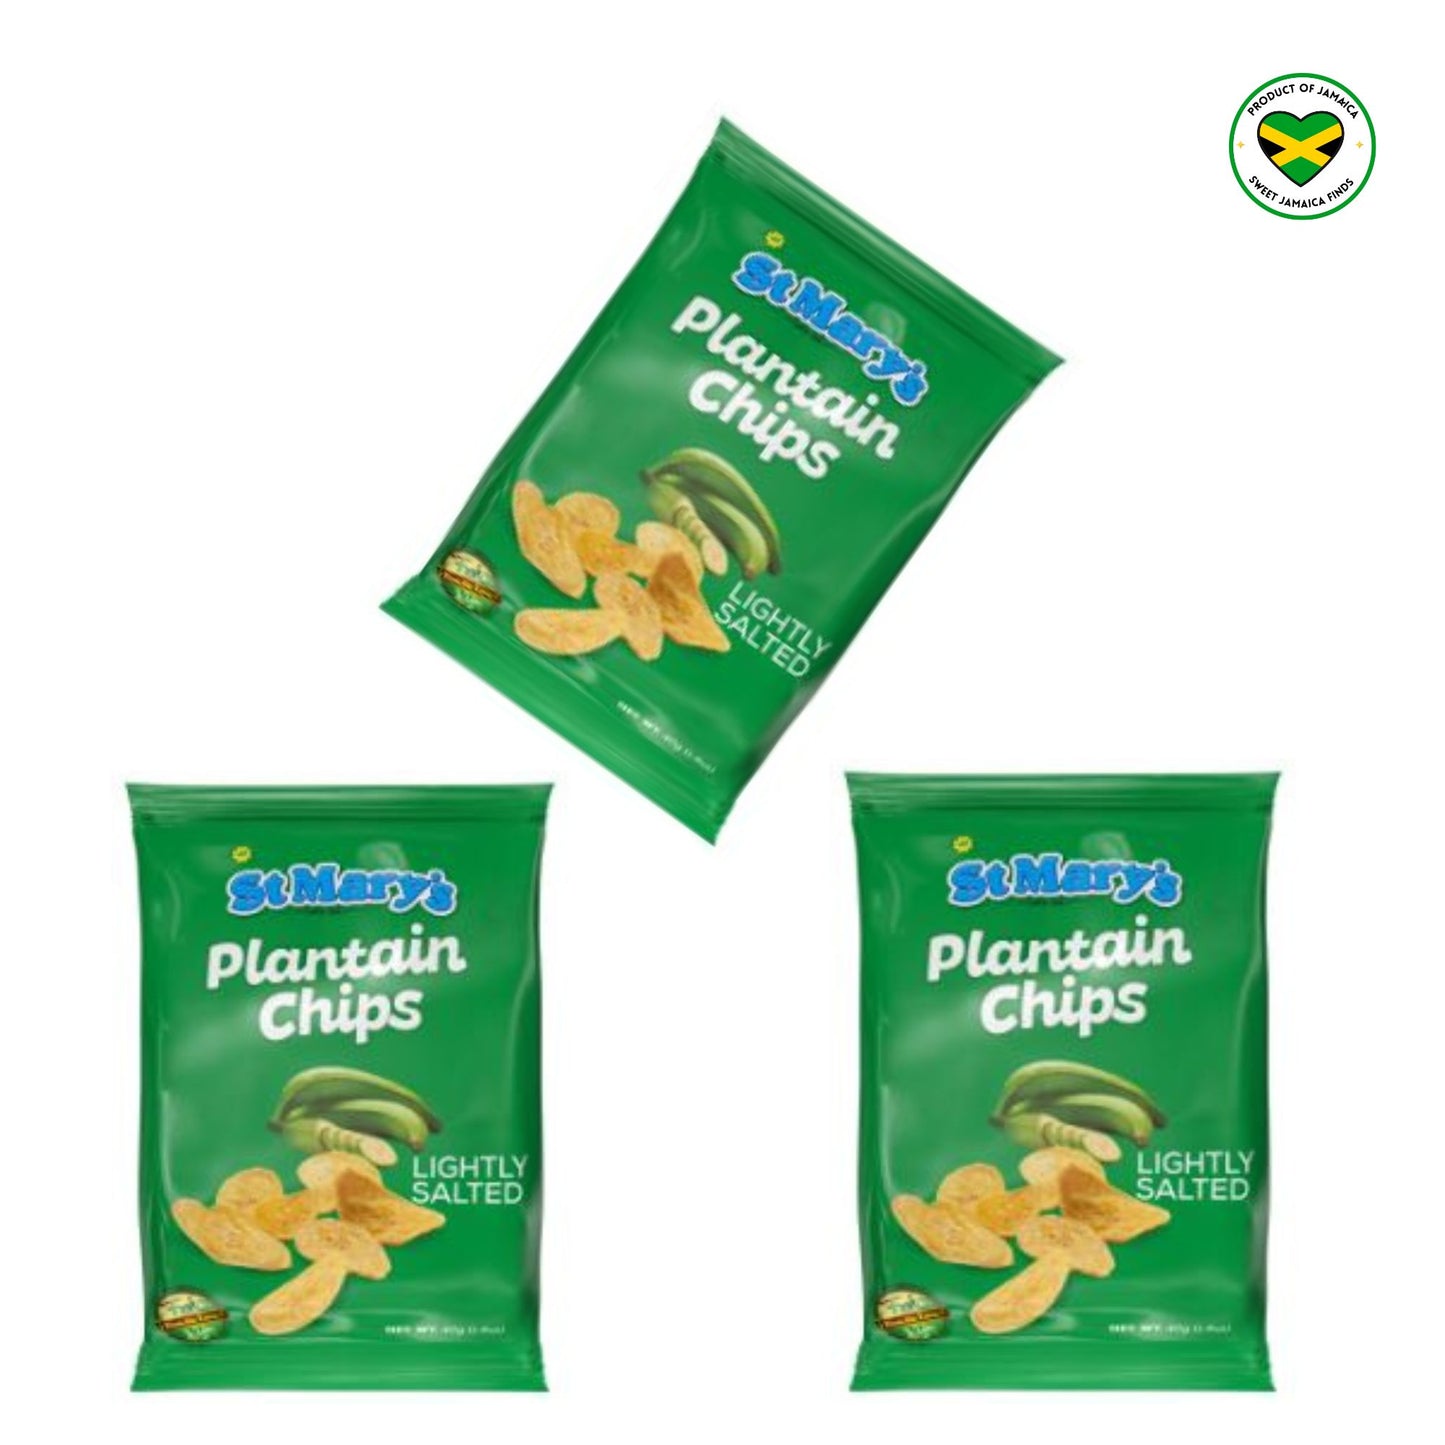 St. Mary's Plantain Chips Lightly Salted  (multi-pack)